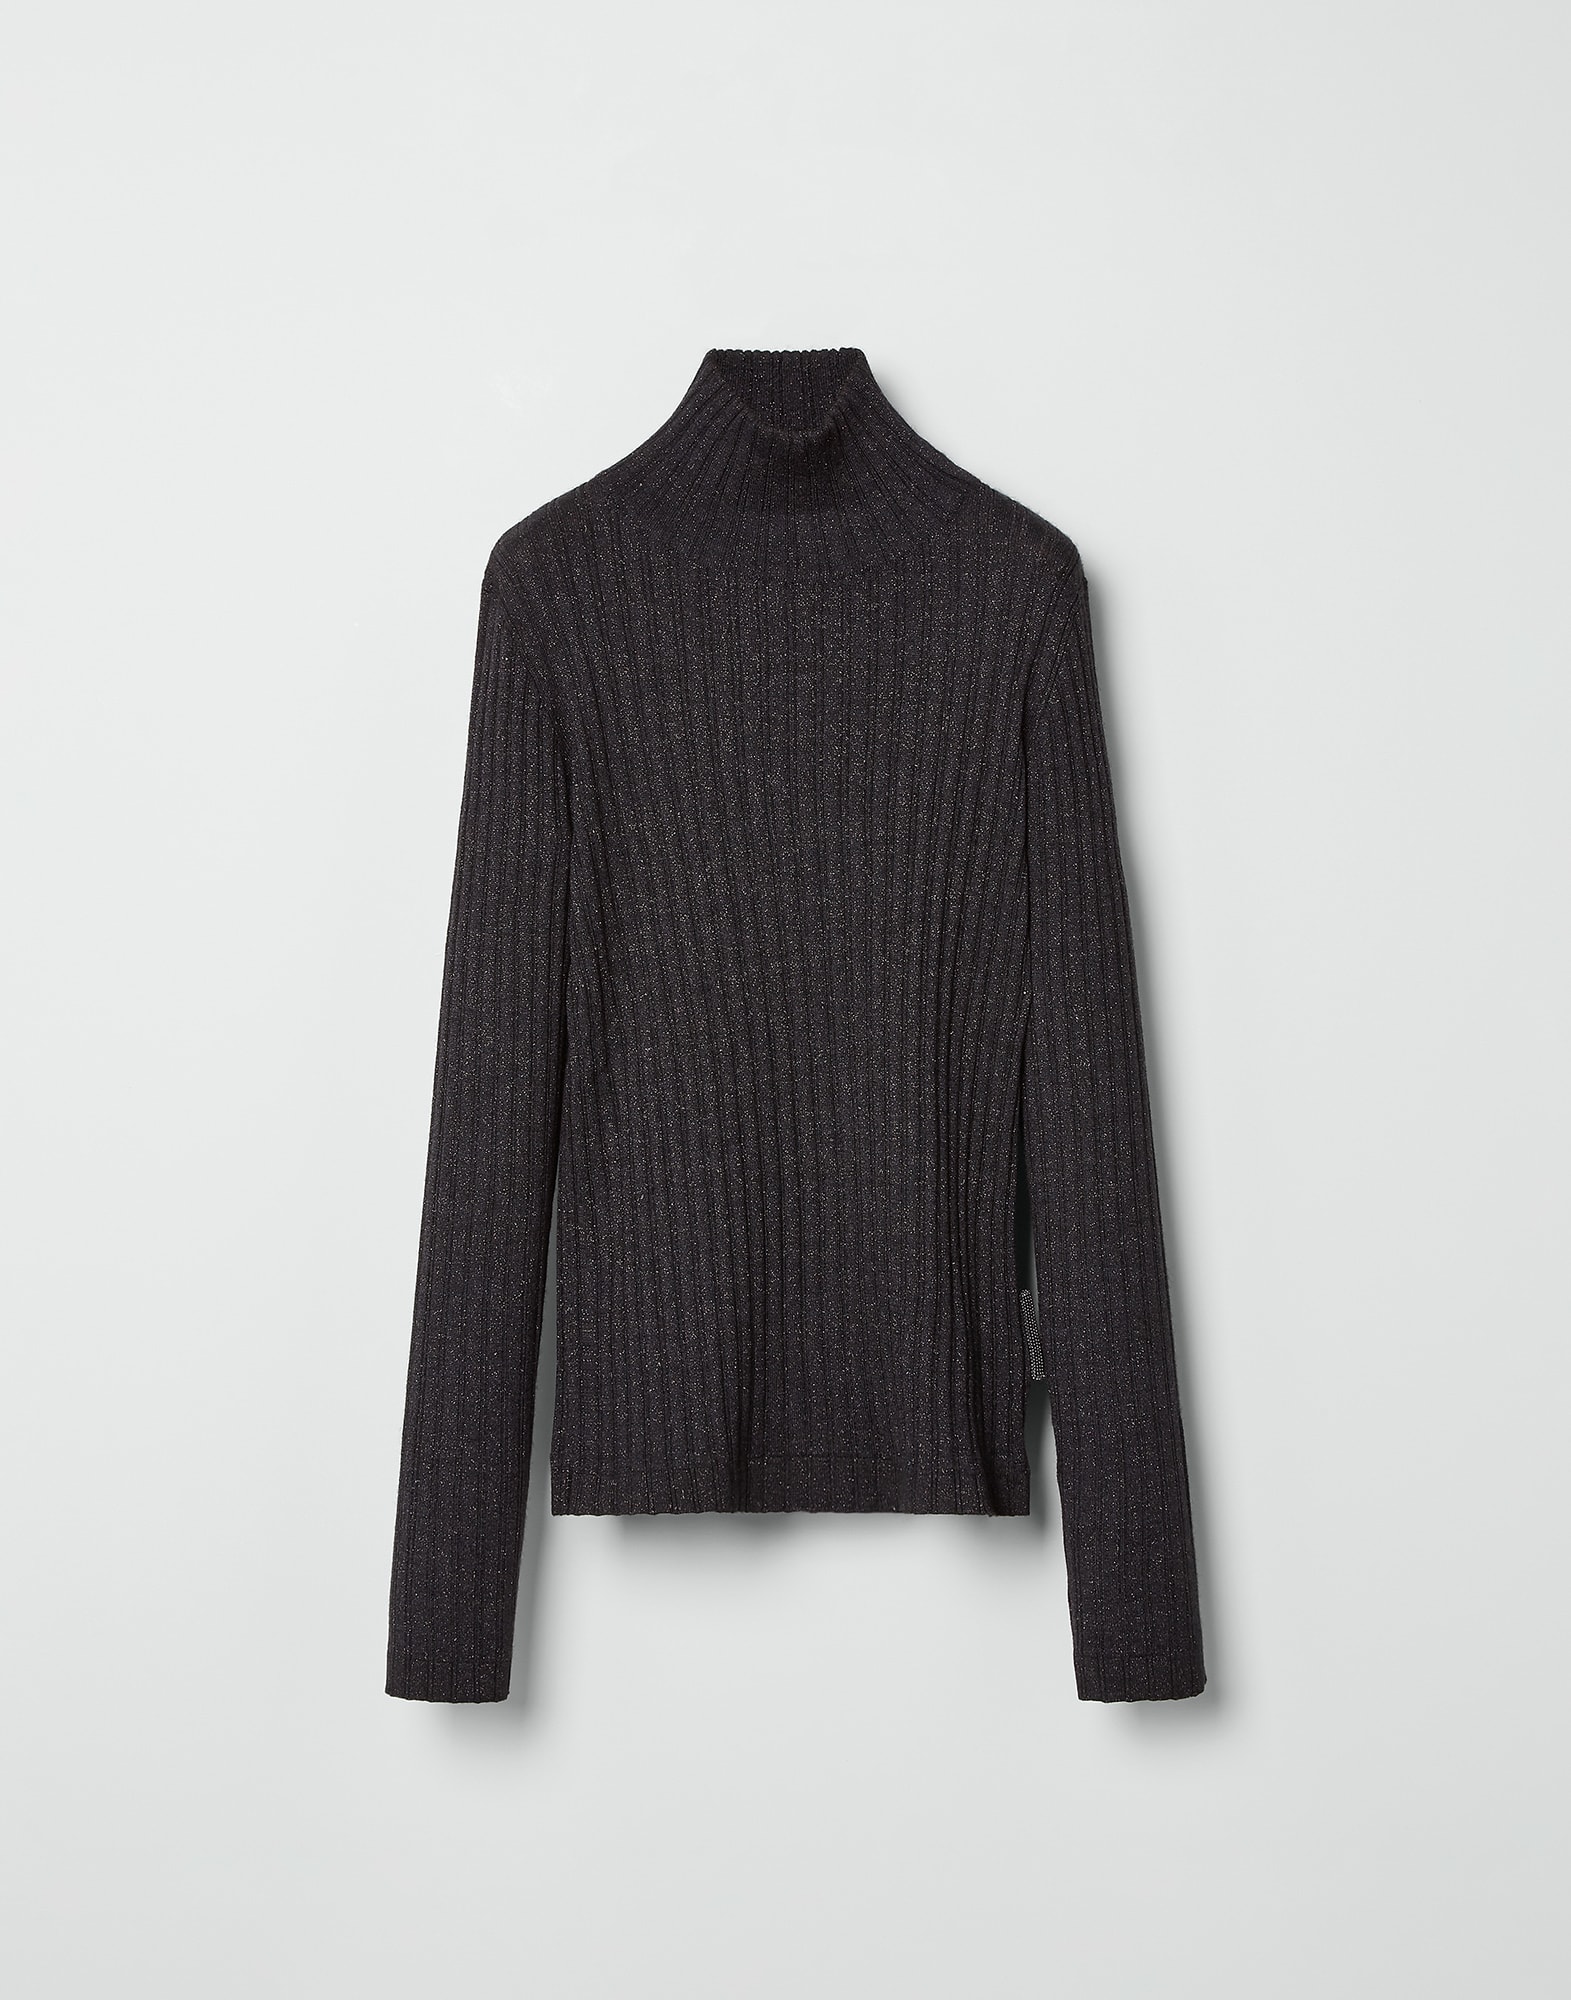 High Neck Sweater - Front view